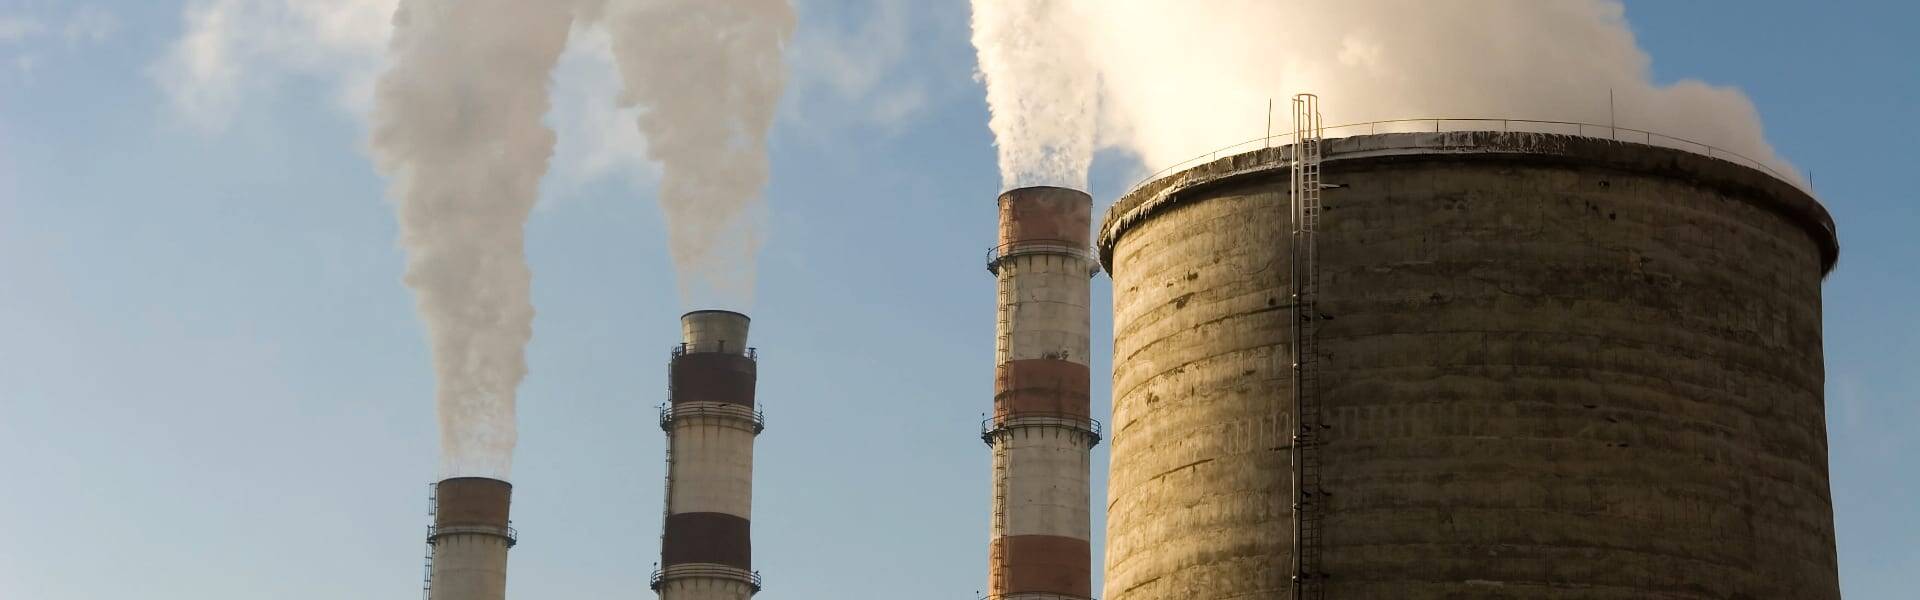 Large energy suppliers back calls for carbon tax